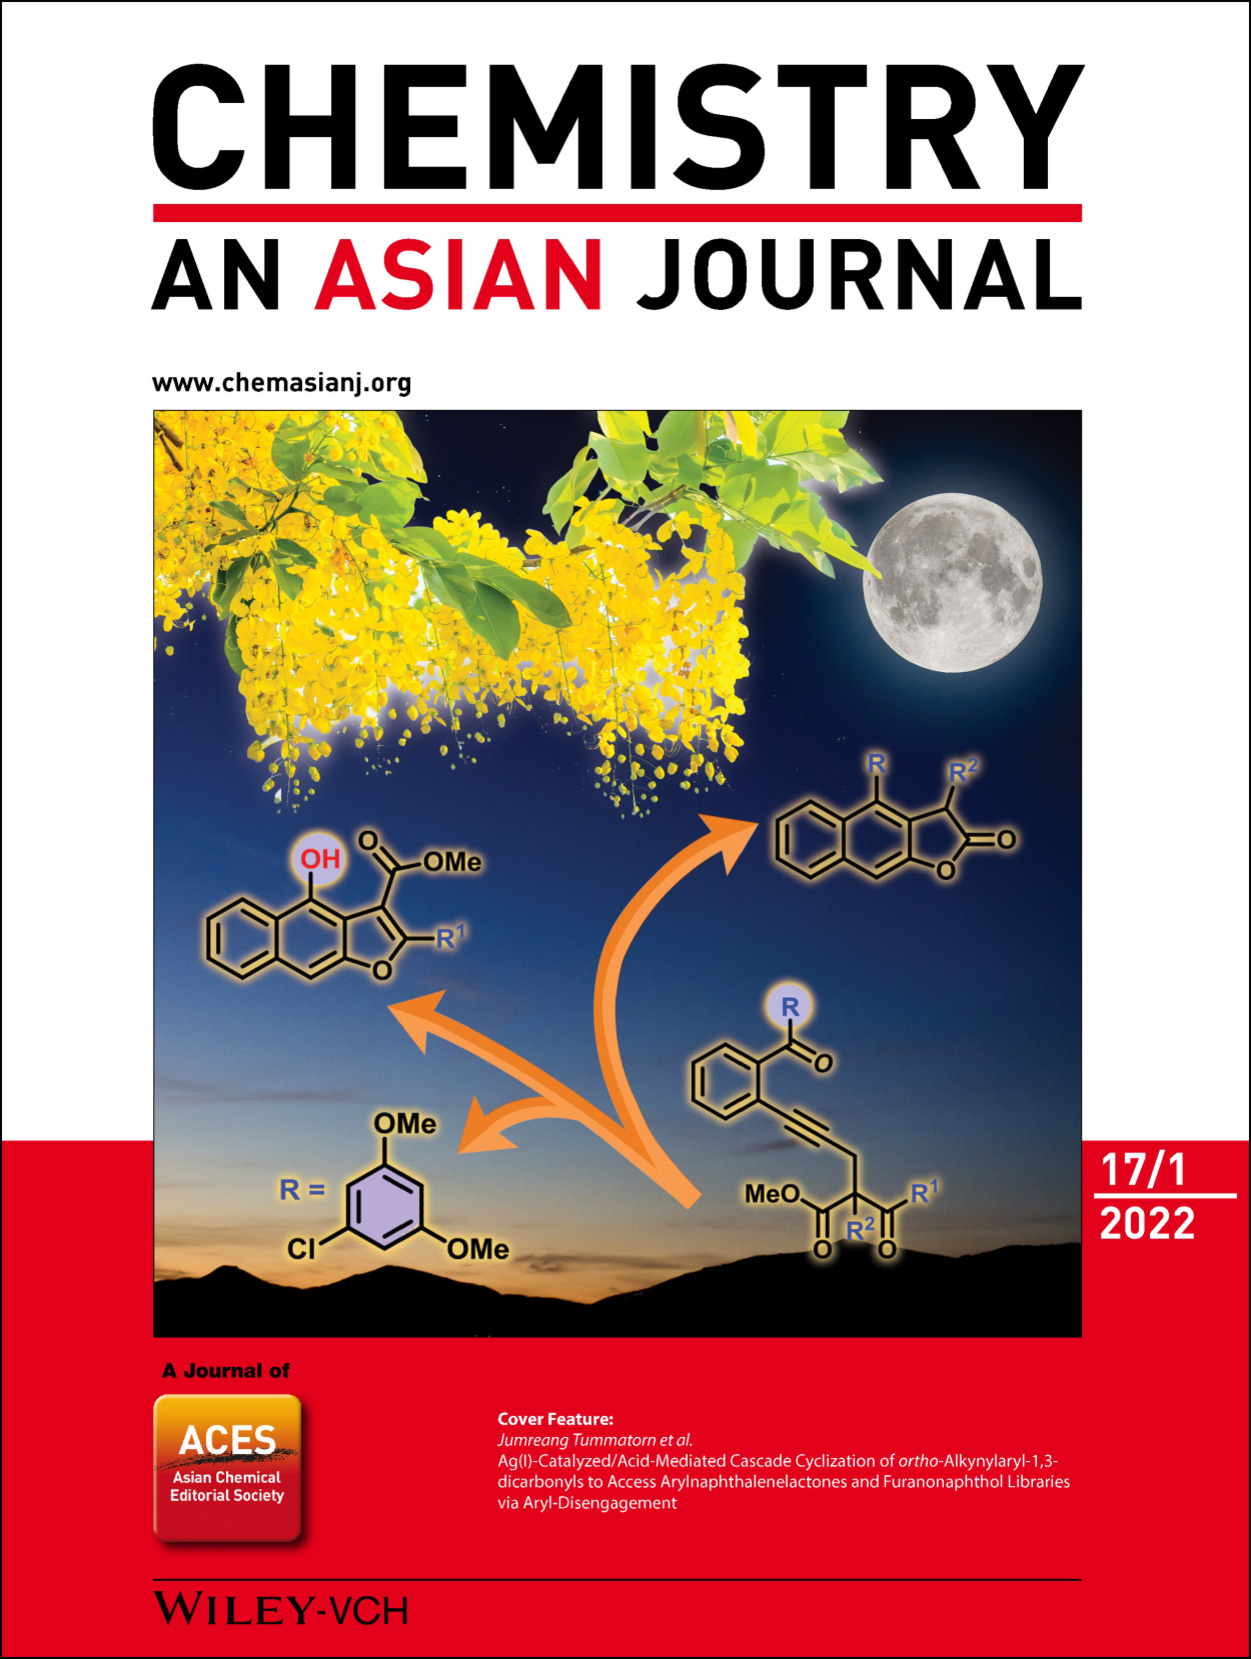 Cover Feature: Ag(I)‐Catalyzed/Acid‐Mediated Cascade Cyclization of ortho‐Alkynylaryl‐1,3‐dicarbonyls to Access Arylnaphthalenelactones and Furanonaphthol Libraries via Aryl‐Disengagement (Chem. Asian J. 1/2022)